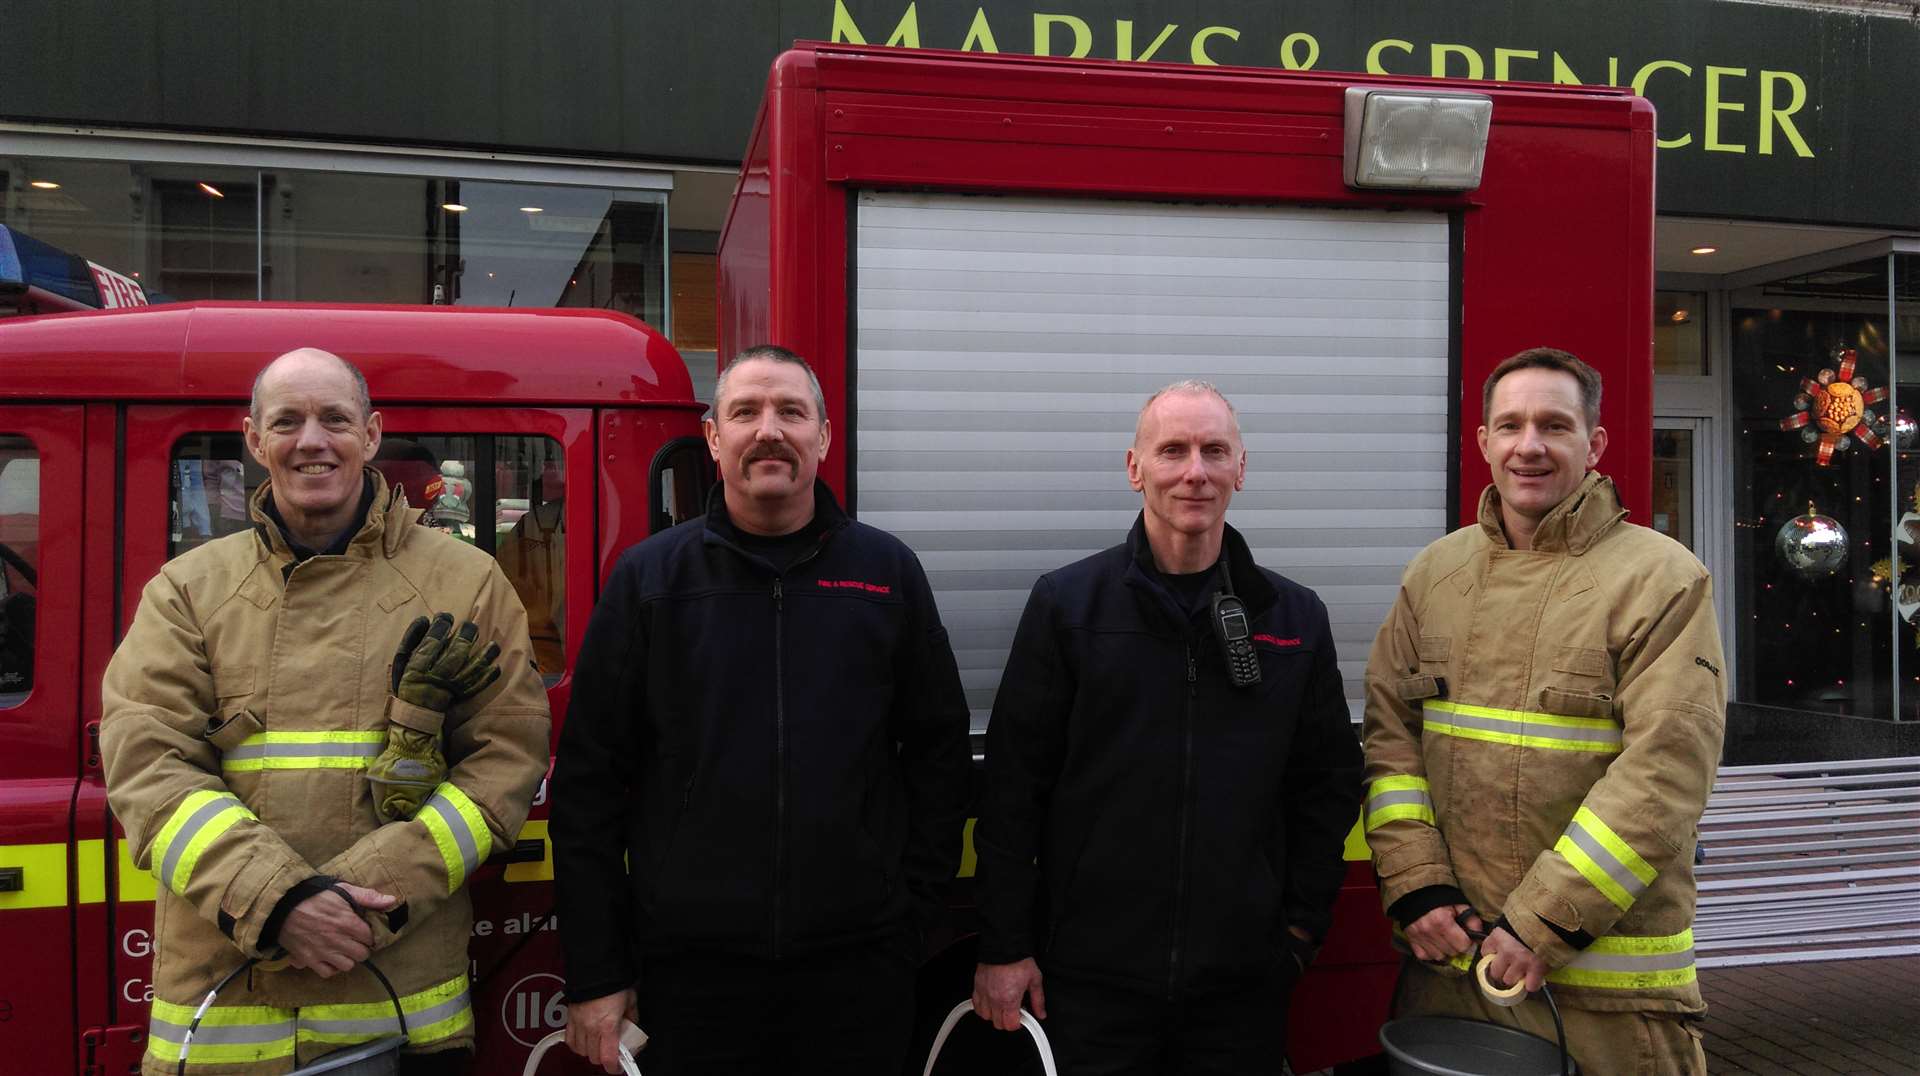 Deal firemen Jamie Dodd, Paul Copley, Craig Sheridan and Paul Evans during the Christmas collections